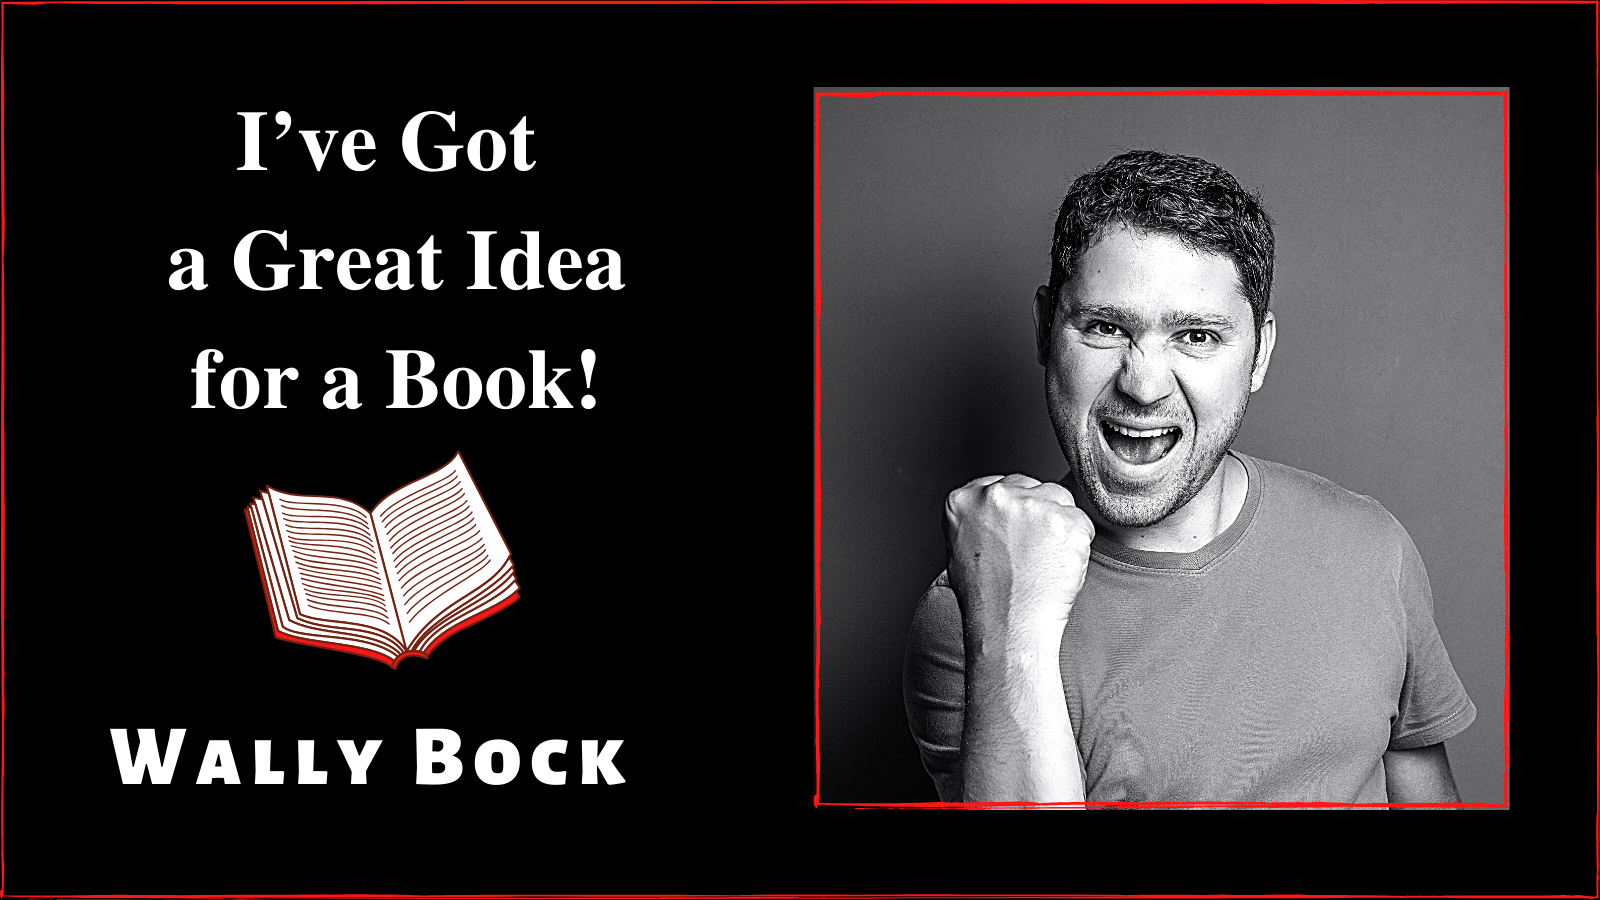 I’ve got a great idea for a book!